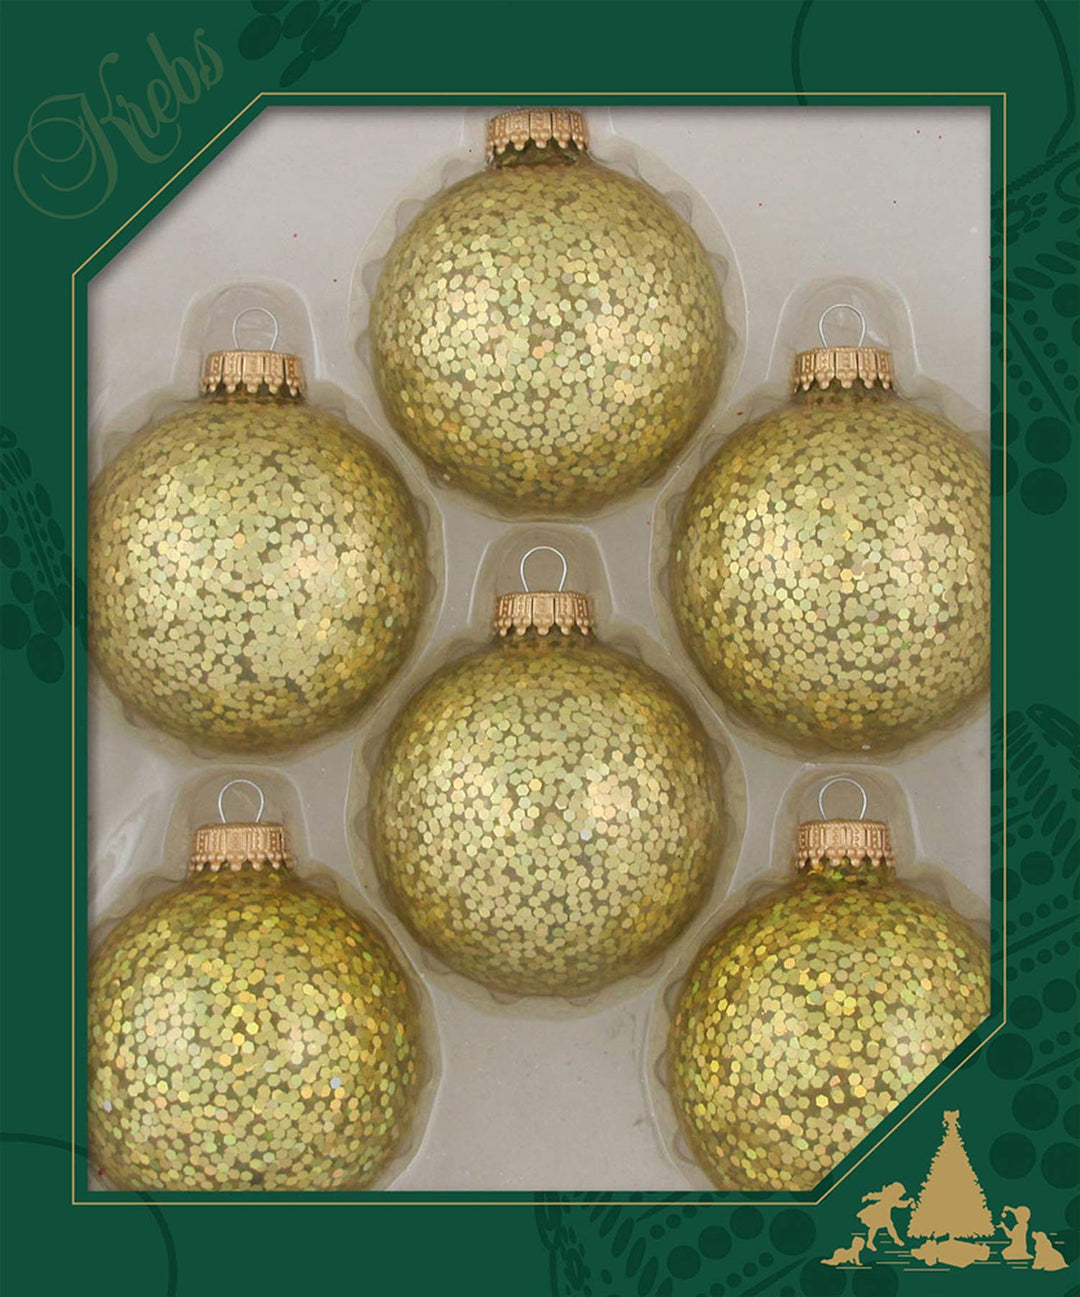 Glass Christmas Tree Ornaments - 67mm / 2.63" [6 Pieces] Designer Balls from Christmas By Krebs Seamless Hanging Holiday Decor (Gold Spangle)